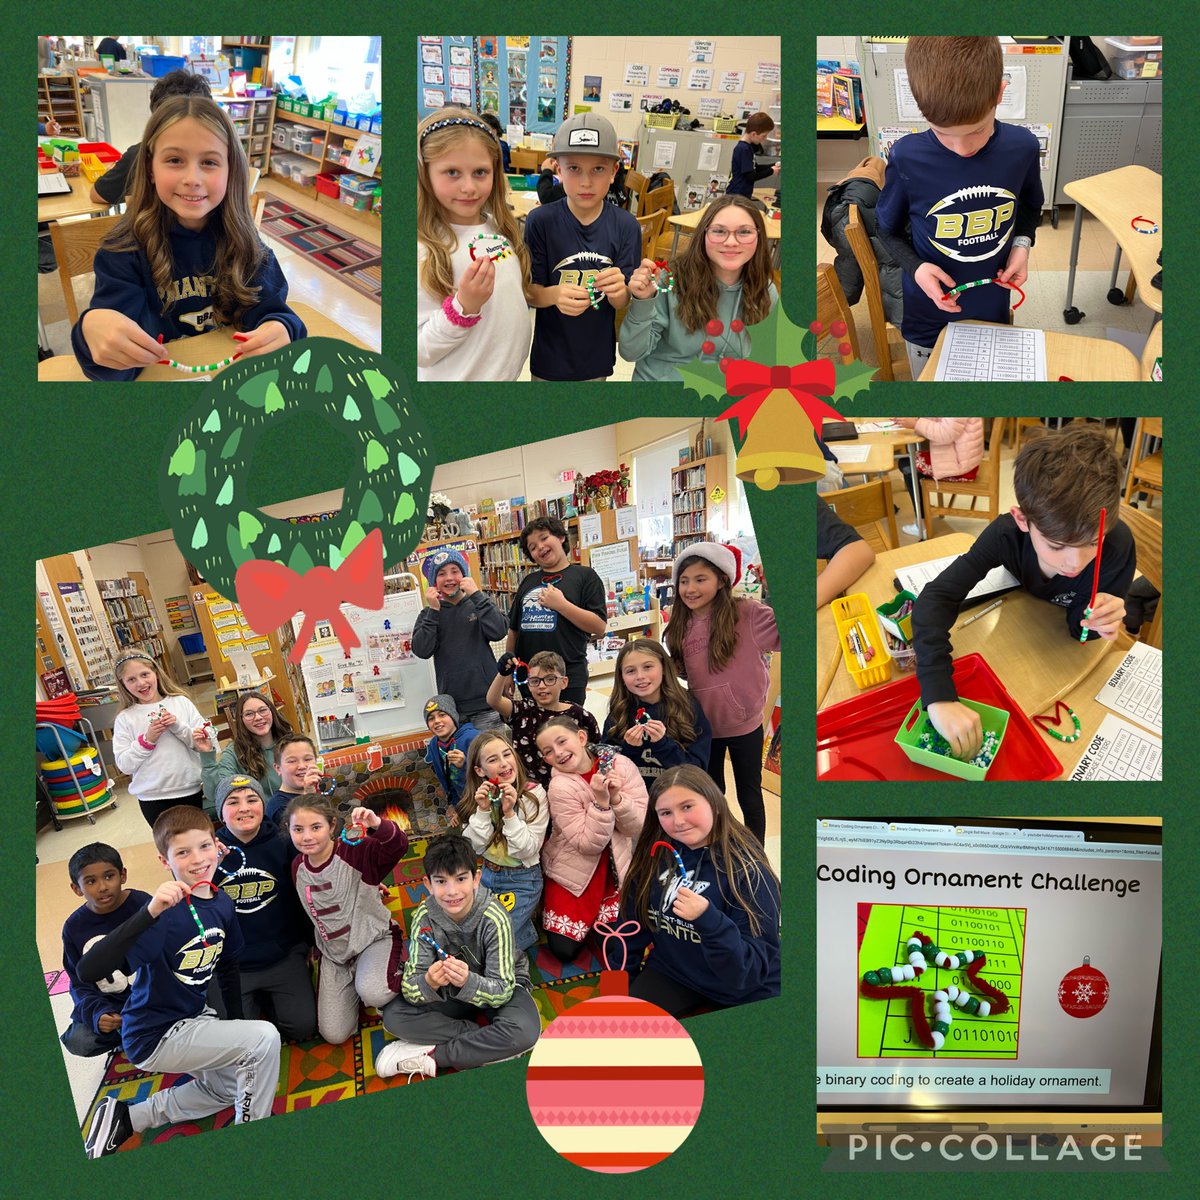 5KL created holiday ornaments for someone special using binary code and then cracked a secret coding message. 🎄🔎Great work and effort! ⁦@BPESchool⁩ ⁦@BBPSchools⁩ ⁦@TrishLeeBPE⁩ #codingisfun #BBPlibrary #holidaychallenge